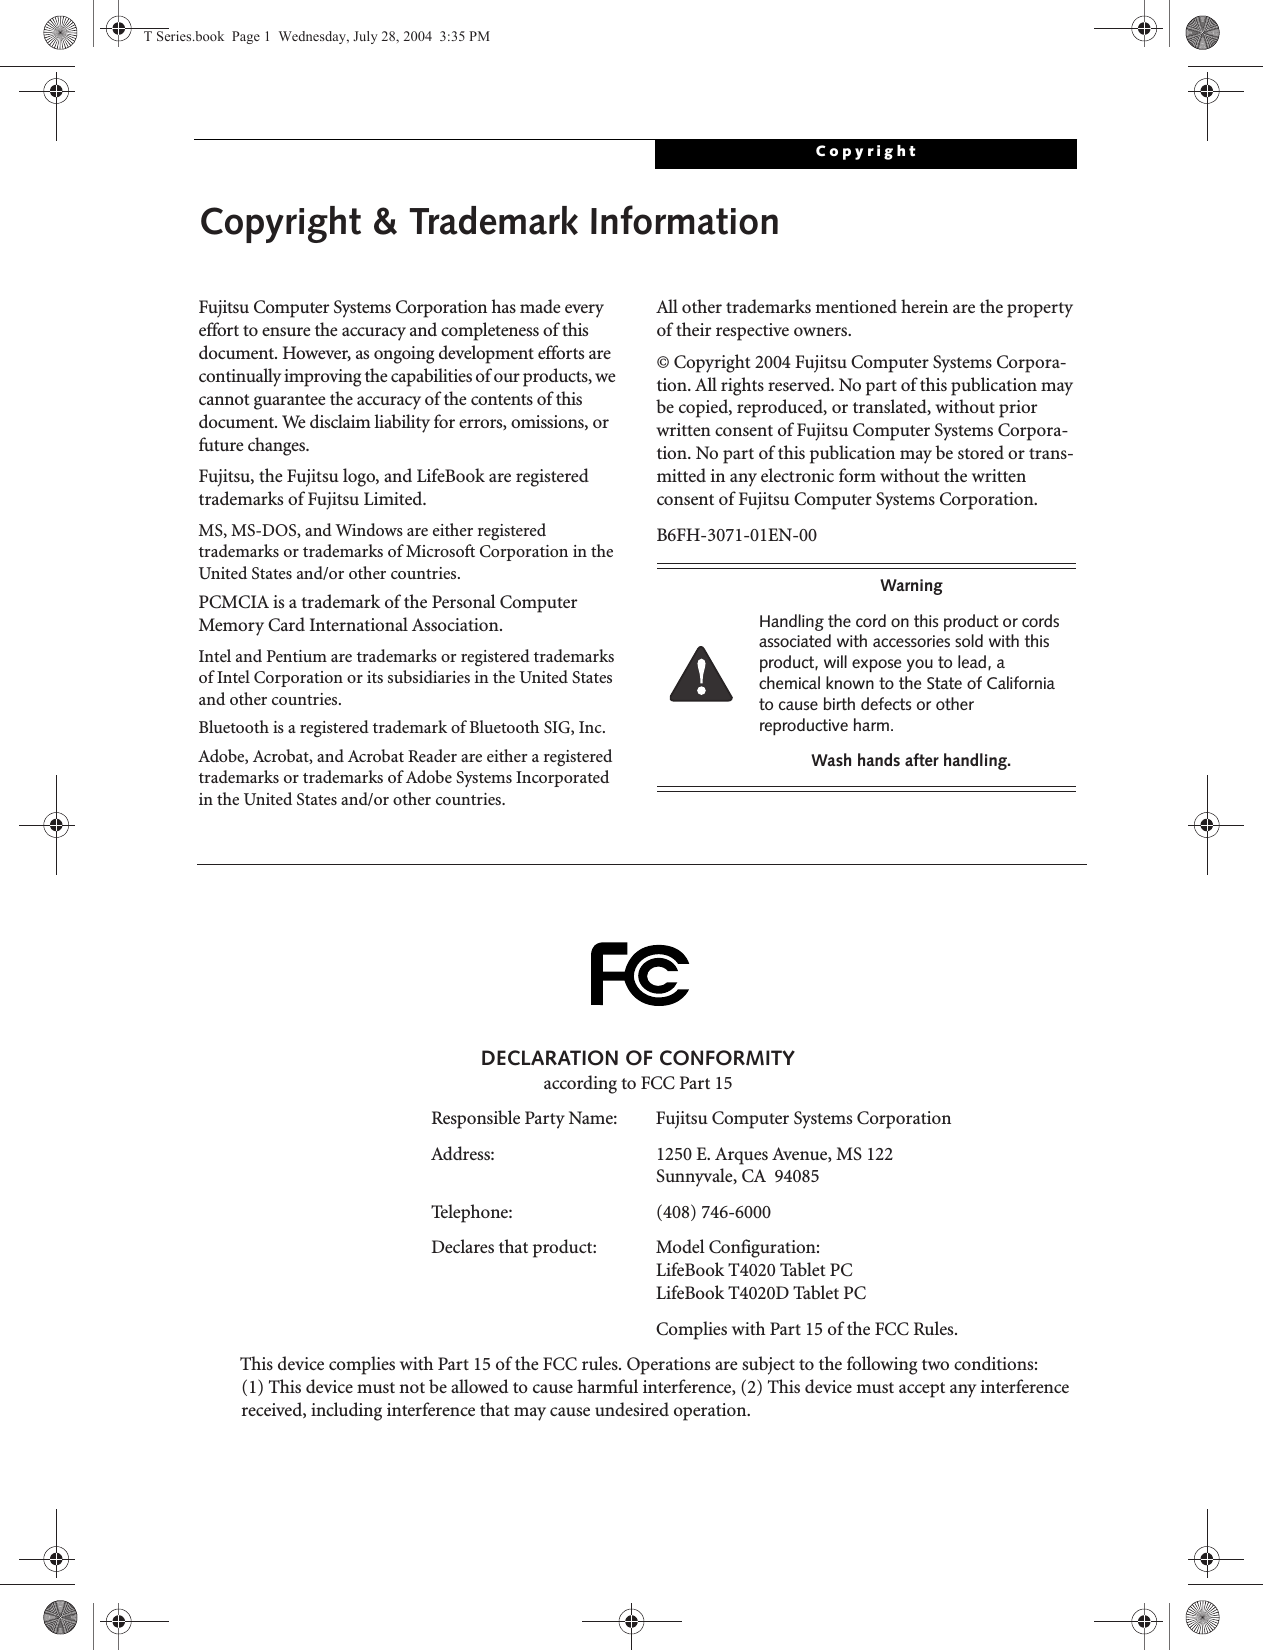 CopyrightCopyright &amp; Trademark InformationFujitsu Computer Systems Corporation has made every effort to ensure the accuracy and completeness of this document. However, as ongoing development efforts are continually improving the capabilities of our products, we cannot guarantee the accuracy of the contents of this document. We disclaim liability for errors, omissions, or future changes.Fujitsu, the Fujitsu logo, and LifeBook are registered trademarks of Fujitsu Limited.MS, MS-DOS, and Windows are either registered trademarks or trademarks of Microsoft Corporation in the United States and/or other countries.PCMCIA is a trademark of the Personal Computer Memory Card International Association.Intel and Pentium are trademarks or registered trademarks of Intel Corporation or its subsidiaries in the United States and other countries.Bluetooth is a registered trademark of Bluetooth SIG, Inc.Adobe, Acrobat, and Acrobat Reader are either a registered trademarks or trademarks of Adobe Systems Incorporated in the United States and/or other countries.All other trademarks mentioned herein are the property of their respective owners.© Copyright 2004 Fujitsu Computer Systems Corpora-tion. All rights reserved. No part of this publication may be copied, reproduced, or translated, without prior written consent of Fujitsu Computer Systems Corpora-tion. No part of this publication may be stored or trans-mitted in any electronic form without the written consent of Fujitsu Computer Systems Corporation.B6FH-3071-01EN-00WarningHandling the cord on this product or cords associated with accessories sold with this product, will expose you to lead, a chemical known to the State of California to cause birth defects or other reproductive harm. Wash hands after handling.DECLARATION OF CONFORMITYaccording to FCC Part 15Responsible Party Name: Fujitsu Computer Systems CorporationAddress:  1250 E. Arques Avenue, MS 122Sunnyvale, CA  94085Telephone: (408) 746-6000Declares that product: Model Configuration:LifeBook T4020 Tablet PC LifeBook T4020D Tablet PCComplies with Part 15 of the FCC Rules.This device complies with Part 15 of the FCC rules. Operations are subject to the following two conditions:(1) This device must not be allowed to cause harmful interference, (2) This device must accept any interference received, including interference that may cause undesired operation.T Series.book  Page 1  Wednesday, July 28, 2004  3:35 PM